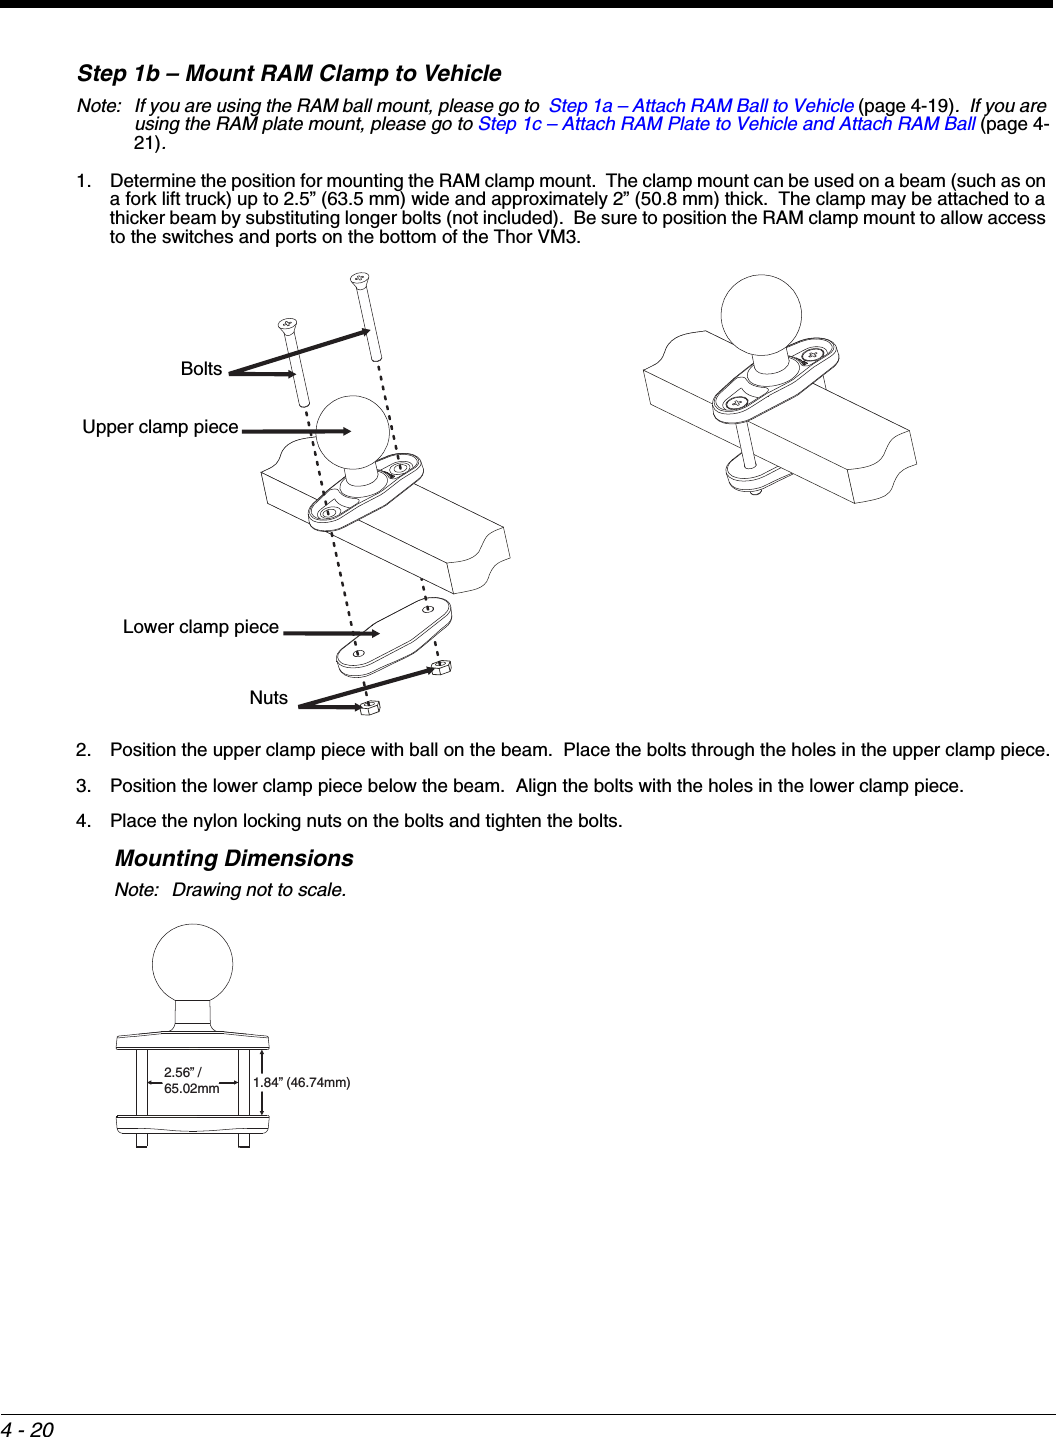 4 - 20Step 1b – Mount RAM Clamp to VehicleNote: If you are using the RAM ball mount, please go to  Step 1a – Attach RAM Ball to Vehicle (page 4-19).  If you are using the RAM plate mount, please go to Step 1c – Attach RAM Plate to Vehicle and Attach RAM Ball (page 4-21).1. Determine the position for mounting the RAM clamp mount.  The clamp mount can be used on a beam (such as on a fork lift truck) up to 2.5” (63.5 mm) wide and approximately 2” (50.8 mm) thick.  The clamp may be attached to a thicker beam by substituting longer bolts (not included).  Be sure to position the RAM clamp mount to allow access to the switches and ports on the bottom of the Thor VM3.2. Position the upper clamp piece with ball on the beam.  Place the bolts through the holes in the upper clamp piece.3. Position the lower clamp piece below the beam.  Align the bolts with the holes in the lower clamp piece.4. Place the nylon locking nuts on the bolts and tighten the bolts.Mounting DimensionsNote: Drawing not to scale.Upper clamp pieceBoltsLower clamp pieceNuts2.56” / 65.02mm1.84” (46.74mm)